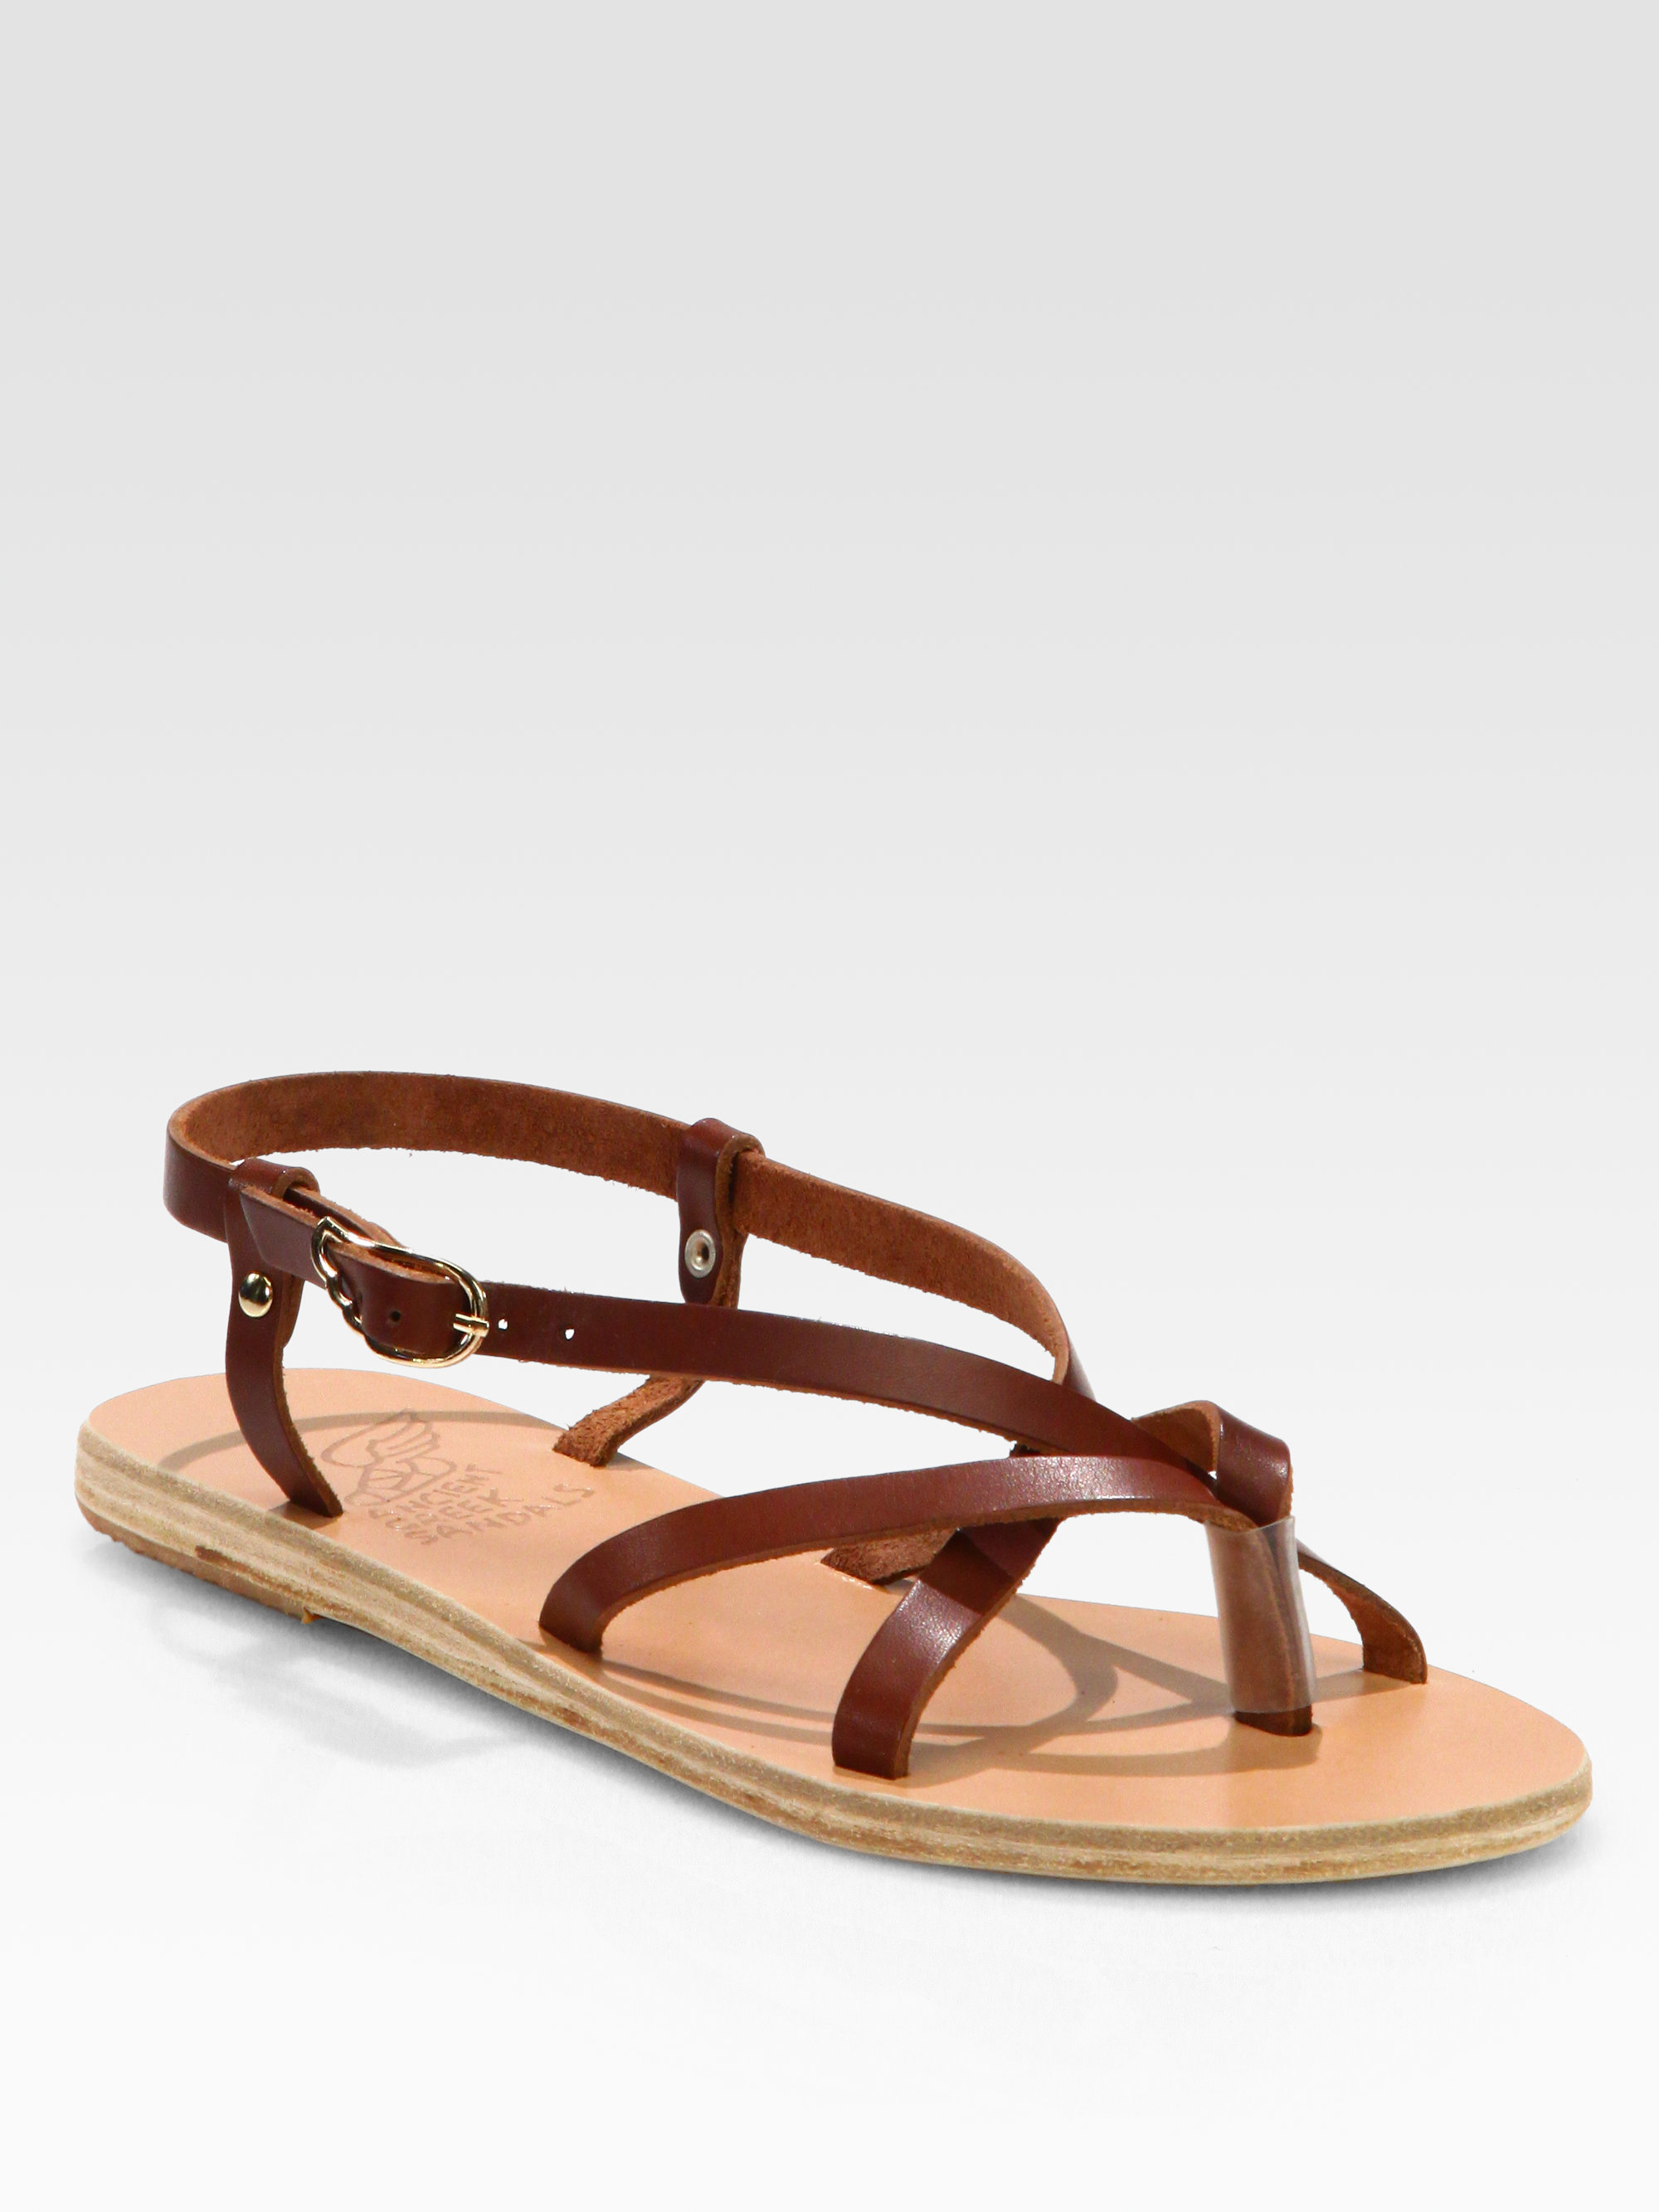 Ancient greek sandals Semele Strappy Leather Sandals in Brown | Lyst